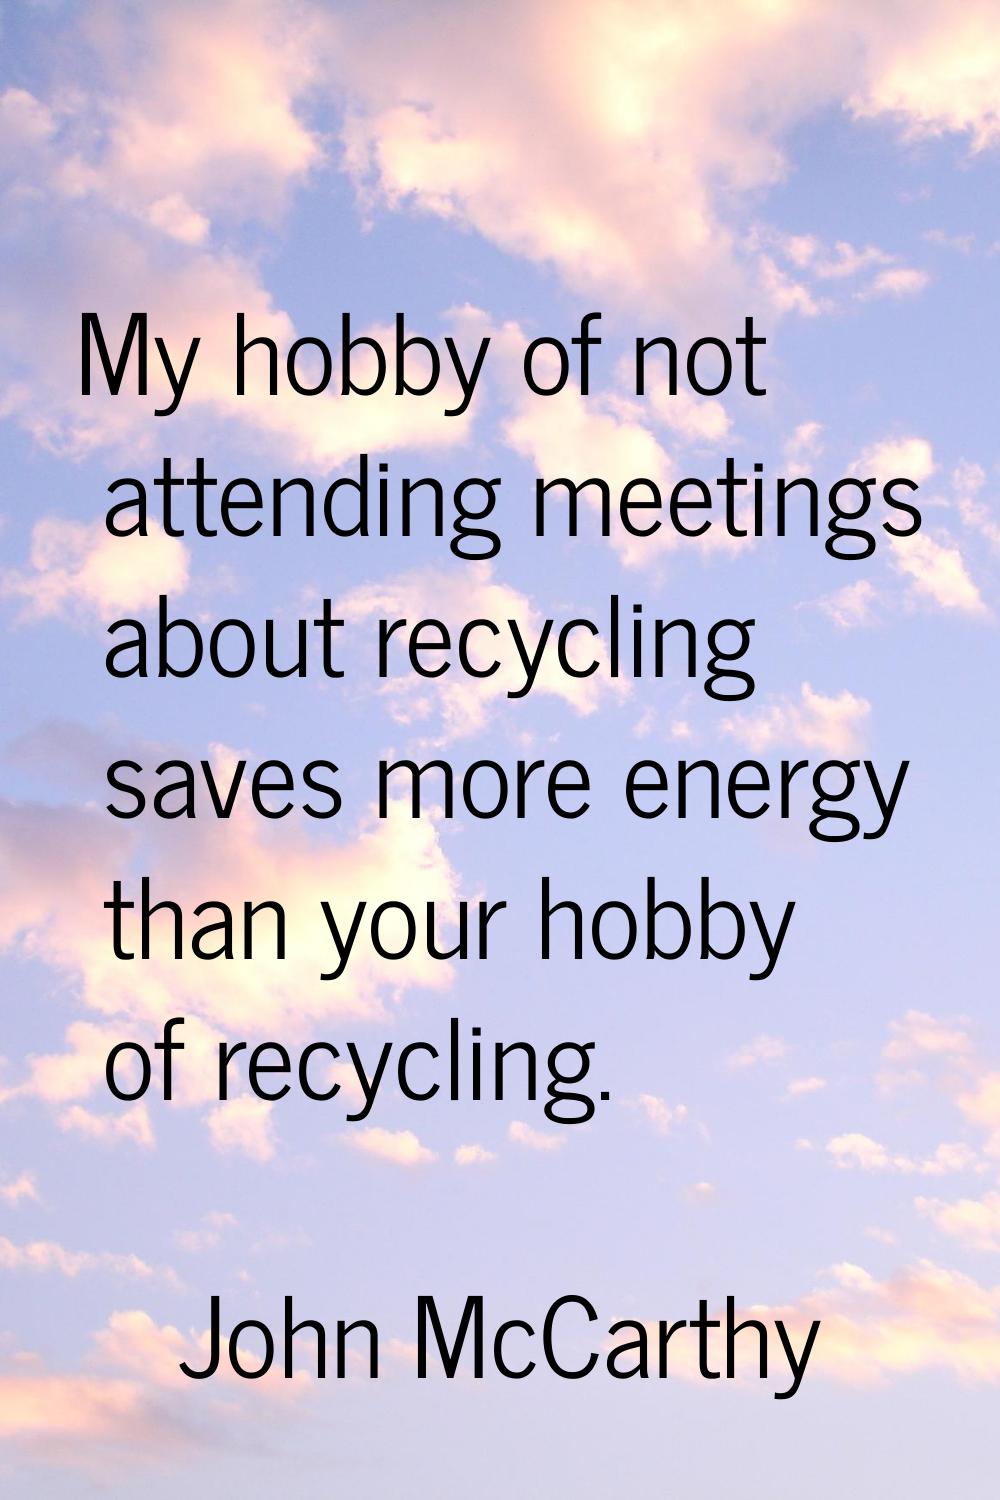 My hobby of not attending meetings about recycling saves more energy than your hobby of recycling.